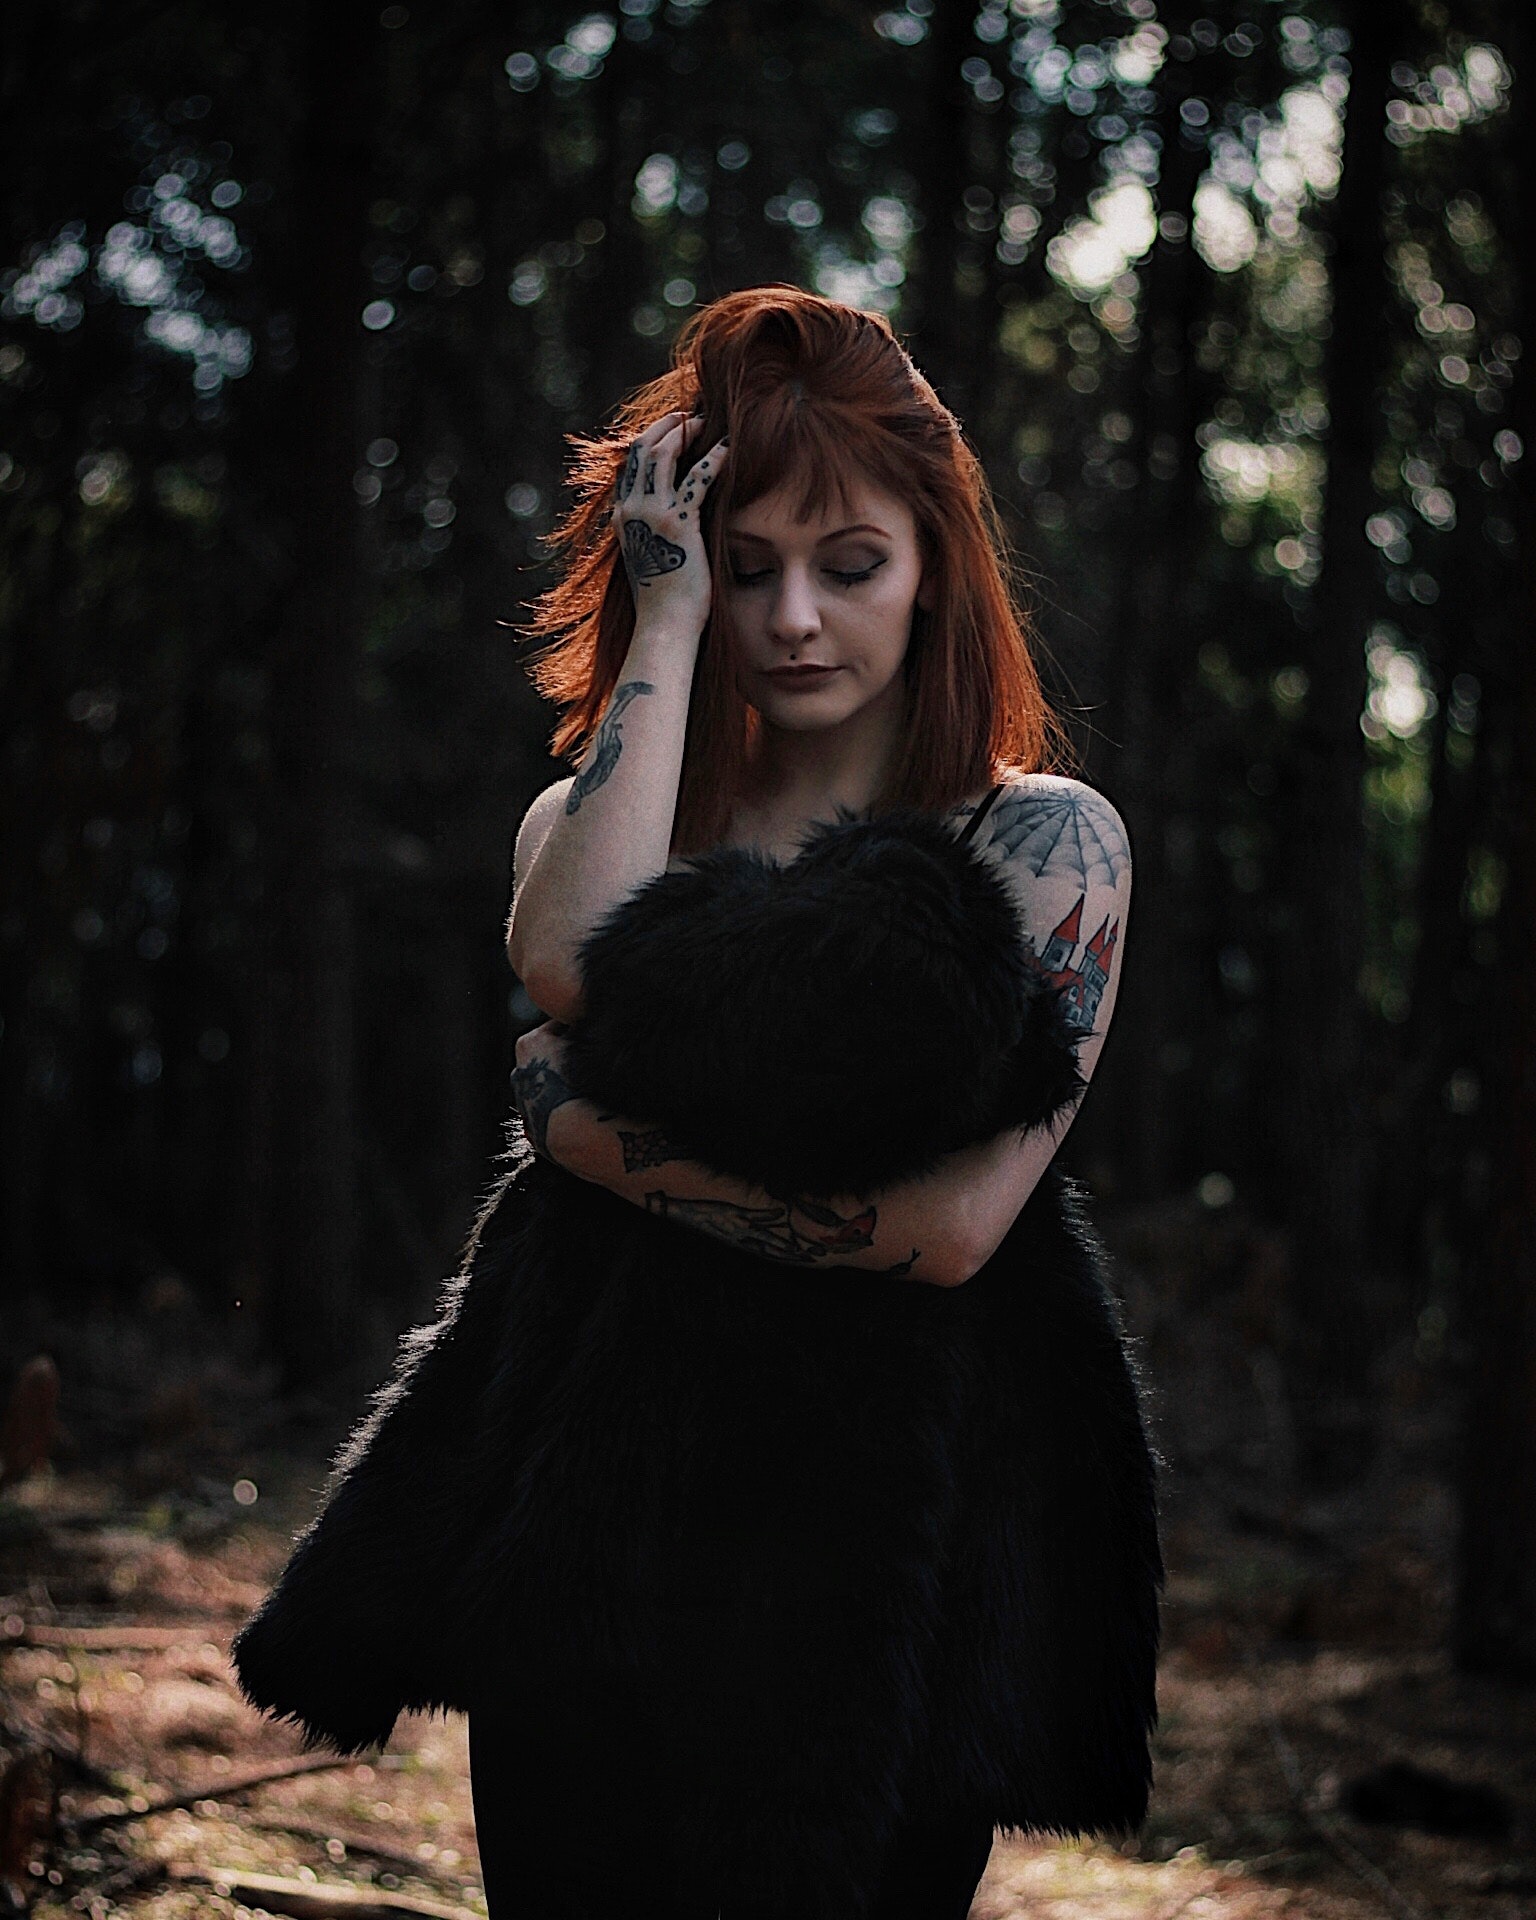 Photography of a Woman Holding Black Fur Coat, Justifyyourlove, Woman, Wear, Tattoos, HQ Photo